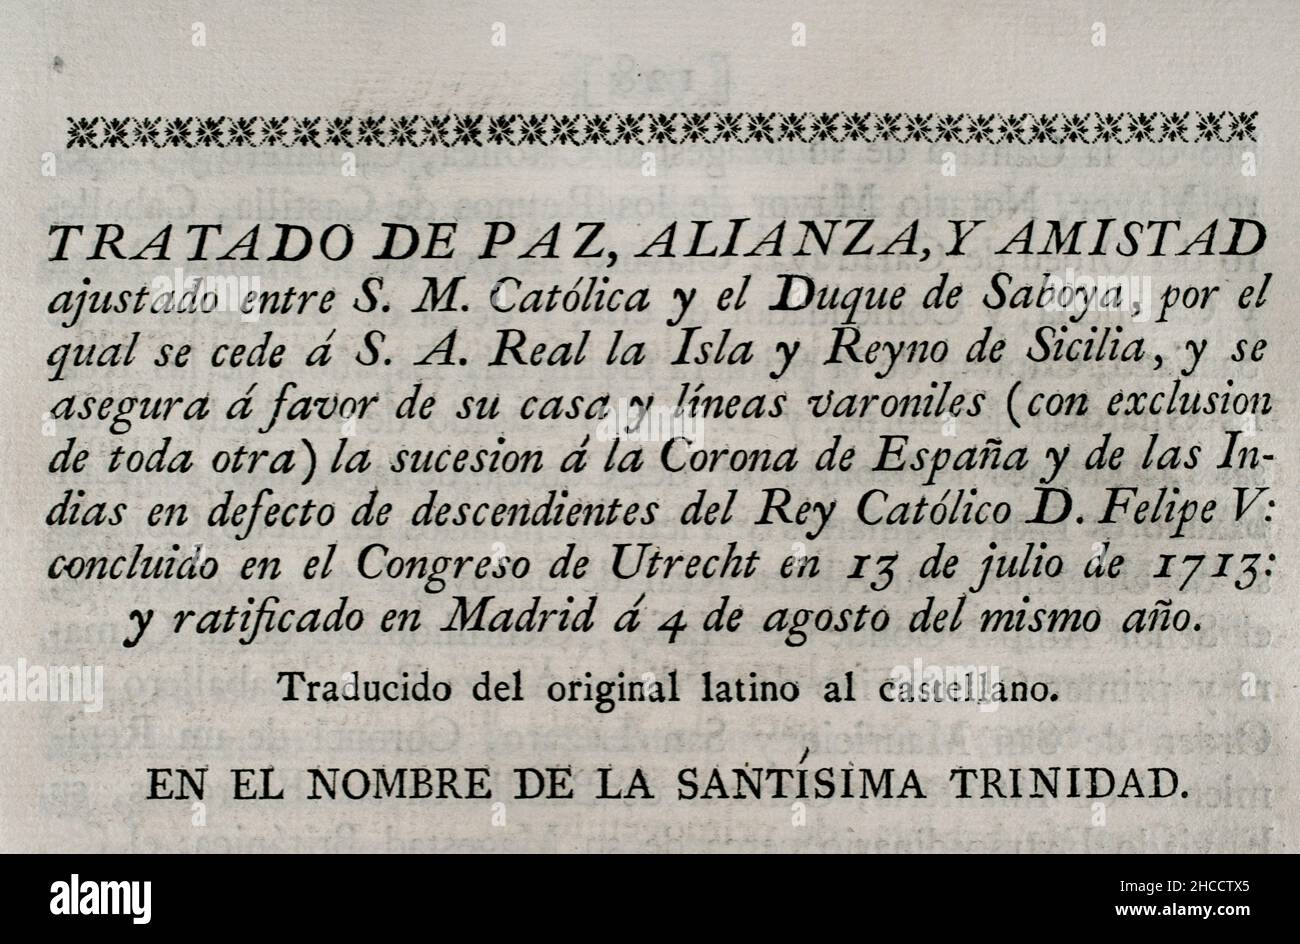 Treaty of peace, alliance and friendship agreed between King Philip V of Spain and the Duke of Savoy, by which the island and kingdom of Sicily were ceded to the Duke. Philip V secures for his house the succession to the Crown of Spain and the Indies. Concluded at the Congress of Utrecht on 13 July 1713 and ratified in Madrid on 4 August of the same year. Collection of the Treaties of Peace, Alliance, Commerce adjusted by the Crown of Spain with the Foreign Powers (Colección de los Tratados de Paz, Alianza, Comercio ajustados por la Corona de España con las Potencias Extranjeras). Volume I. Ma Stock Photo